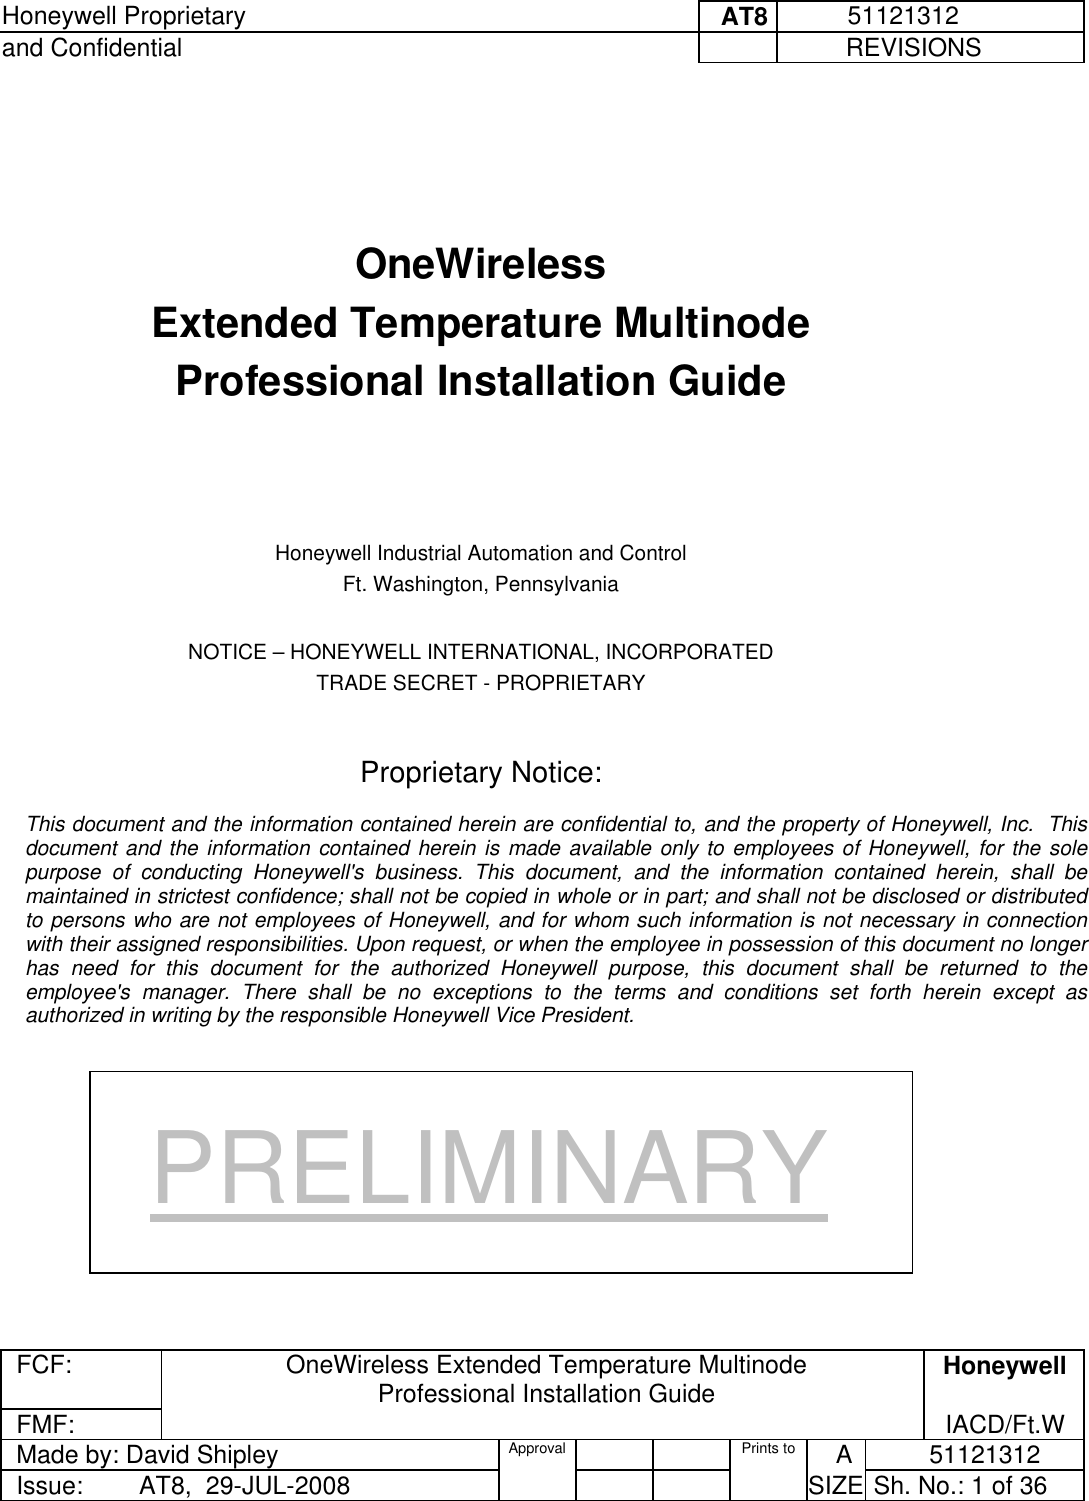 Honeywell Proprietary     AT8           51121312 and Confidential             REVISIONS  FCF: OneWireless Extended Temperature Multinode  Professional Installation Guide  Honeywell FMF:               IACD/Ft.W Made by: David Shipley  Approval   Prints to     A           51121312 Issue:        AT8,  29-JUL-2008          SIZE  Sh. No.: 1 of 36      OneWireless  Extended Temperature Multinode  Professional Installation Guide      Honeywell Industrial Automation and Control Ft. Washington, Pennsylvania  NOTICE – HONEYWELL INTERNATIONAL, INCORPORATED TRADE SECRET - PROPRIETARY   Proprietary Notice:  This document and the information contained herein are confidential to, and the property of Honeywell, Inc.  This document and the information contained herein is made available only to employees of Honeywell, for the sole purpose of conducting Honeywell&apos;s business. This document, and the information contained herein, shall be maintained in strictest confidence; shall not be copied in whole or in part; and shall not be disclosed or distributed to persons who are not employees of Honeywell, and for whom such information is not necessary in connection with their assigned responsibilities. Upon request, or when the employee in possession of this document no longer has need for this document for the authorized Honeywell purpose, this document shall be returned to the employee&apos;s manager. There shall be no exceptions to the terms and conditions set forth herein except as authorized in writing by the responsible Honeywell Vice President. PRELIMINARY 